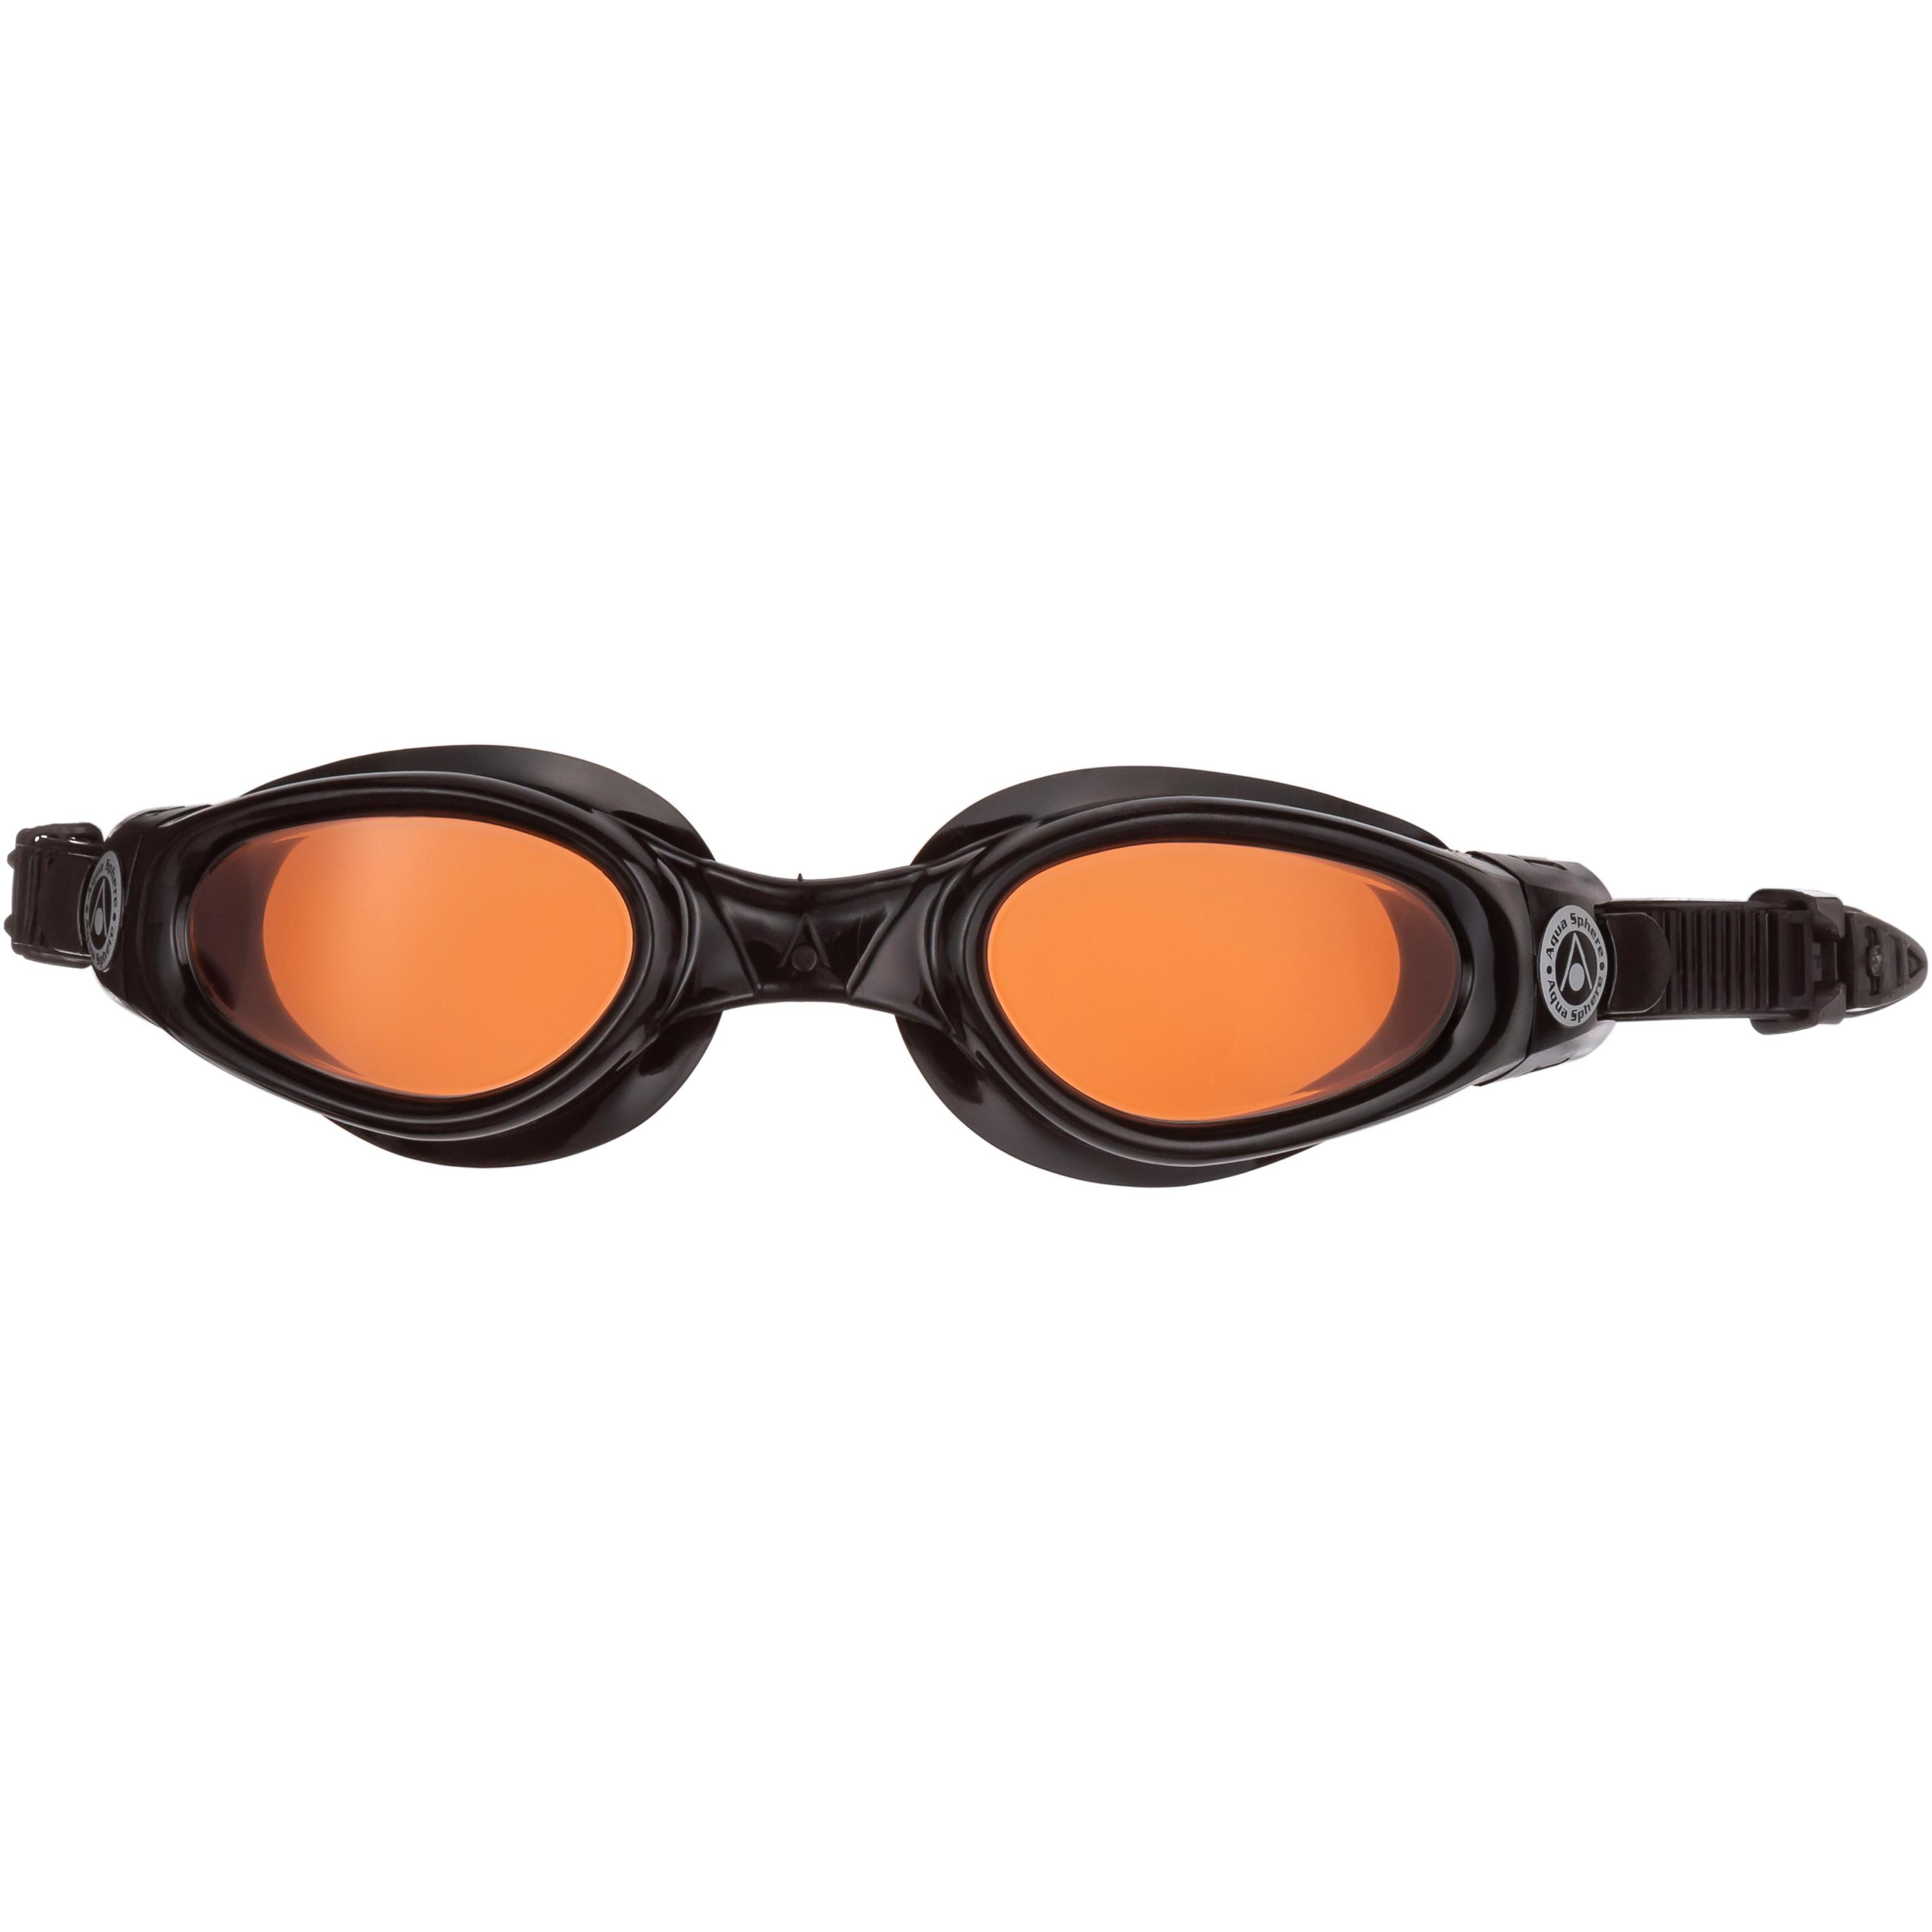 Image of Aquasphere Kaiman Schwimmbrille